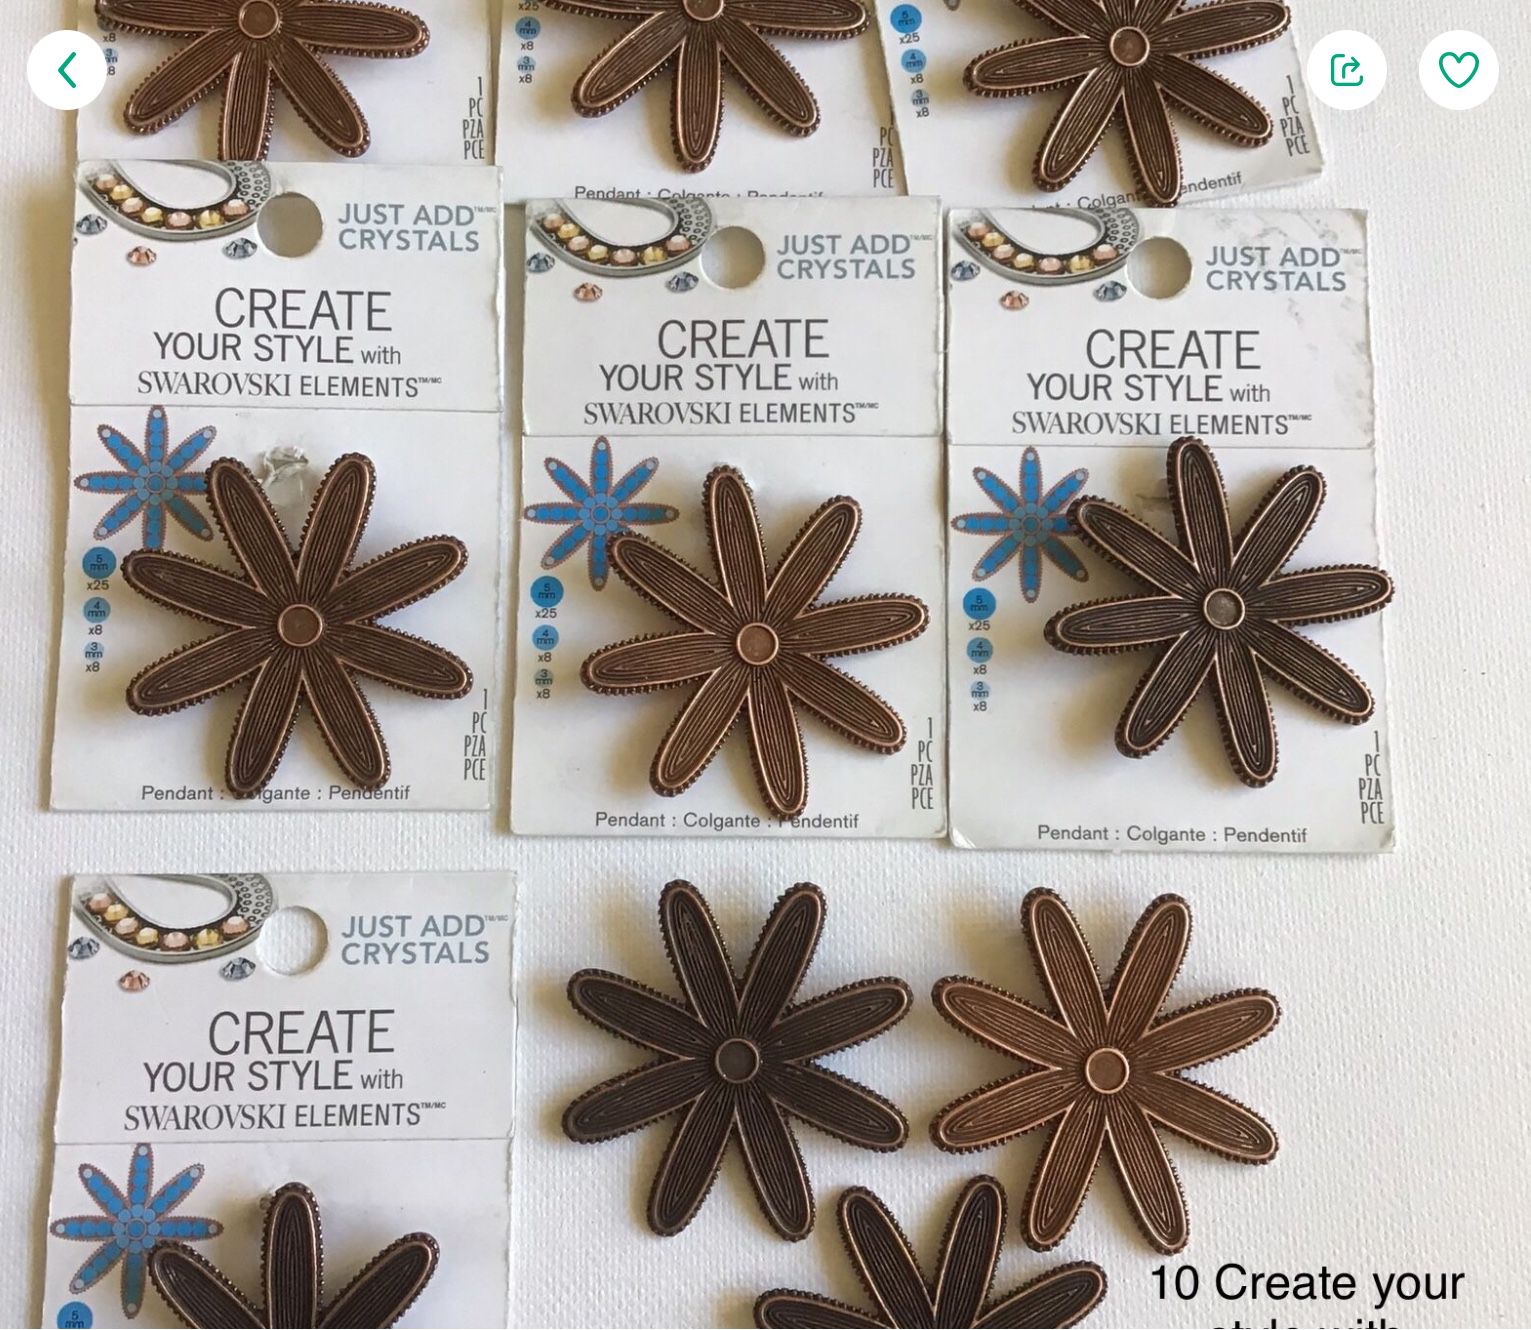 10 Create your style with Swarovski Elements Flower pendants to decorate with crystals (all for $20)